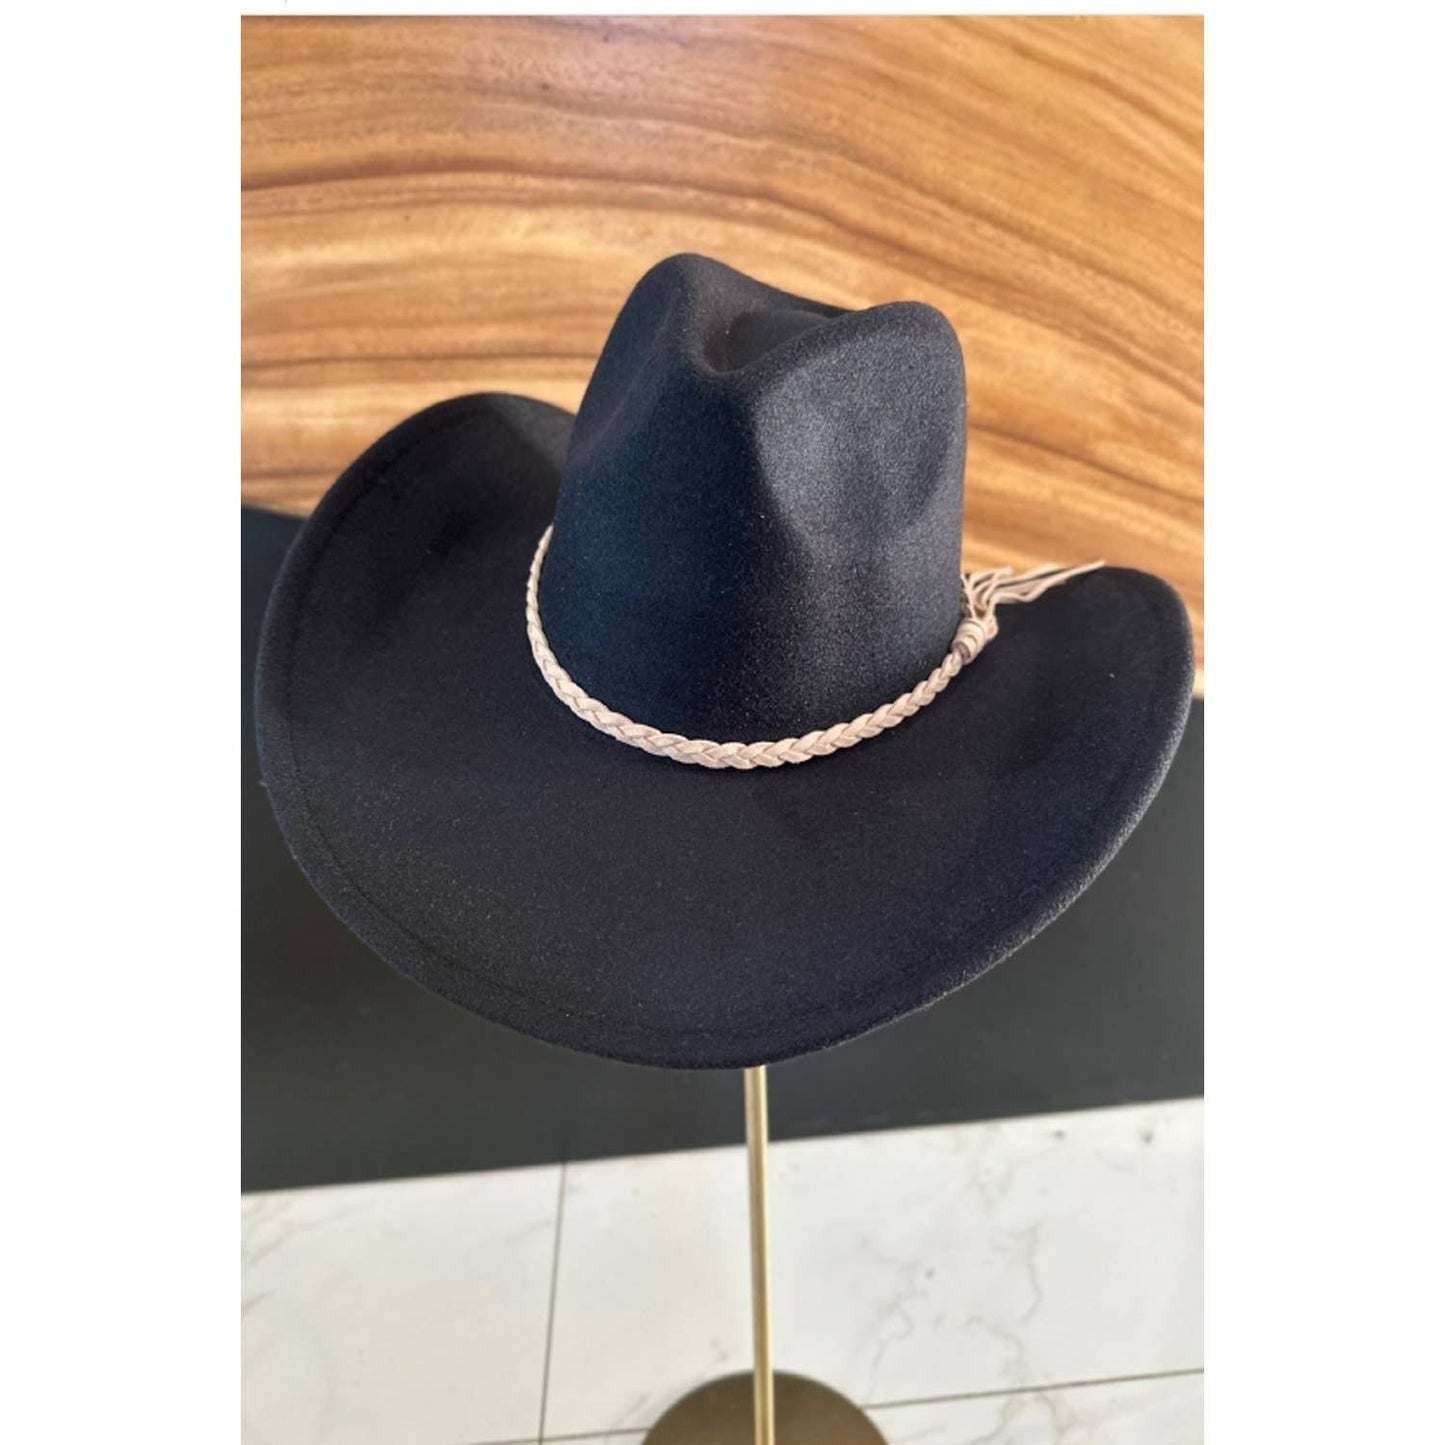 VEGAN FELT COWBOY HAT with Suede Belt: TAUPE / ONE SIZE